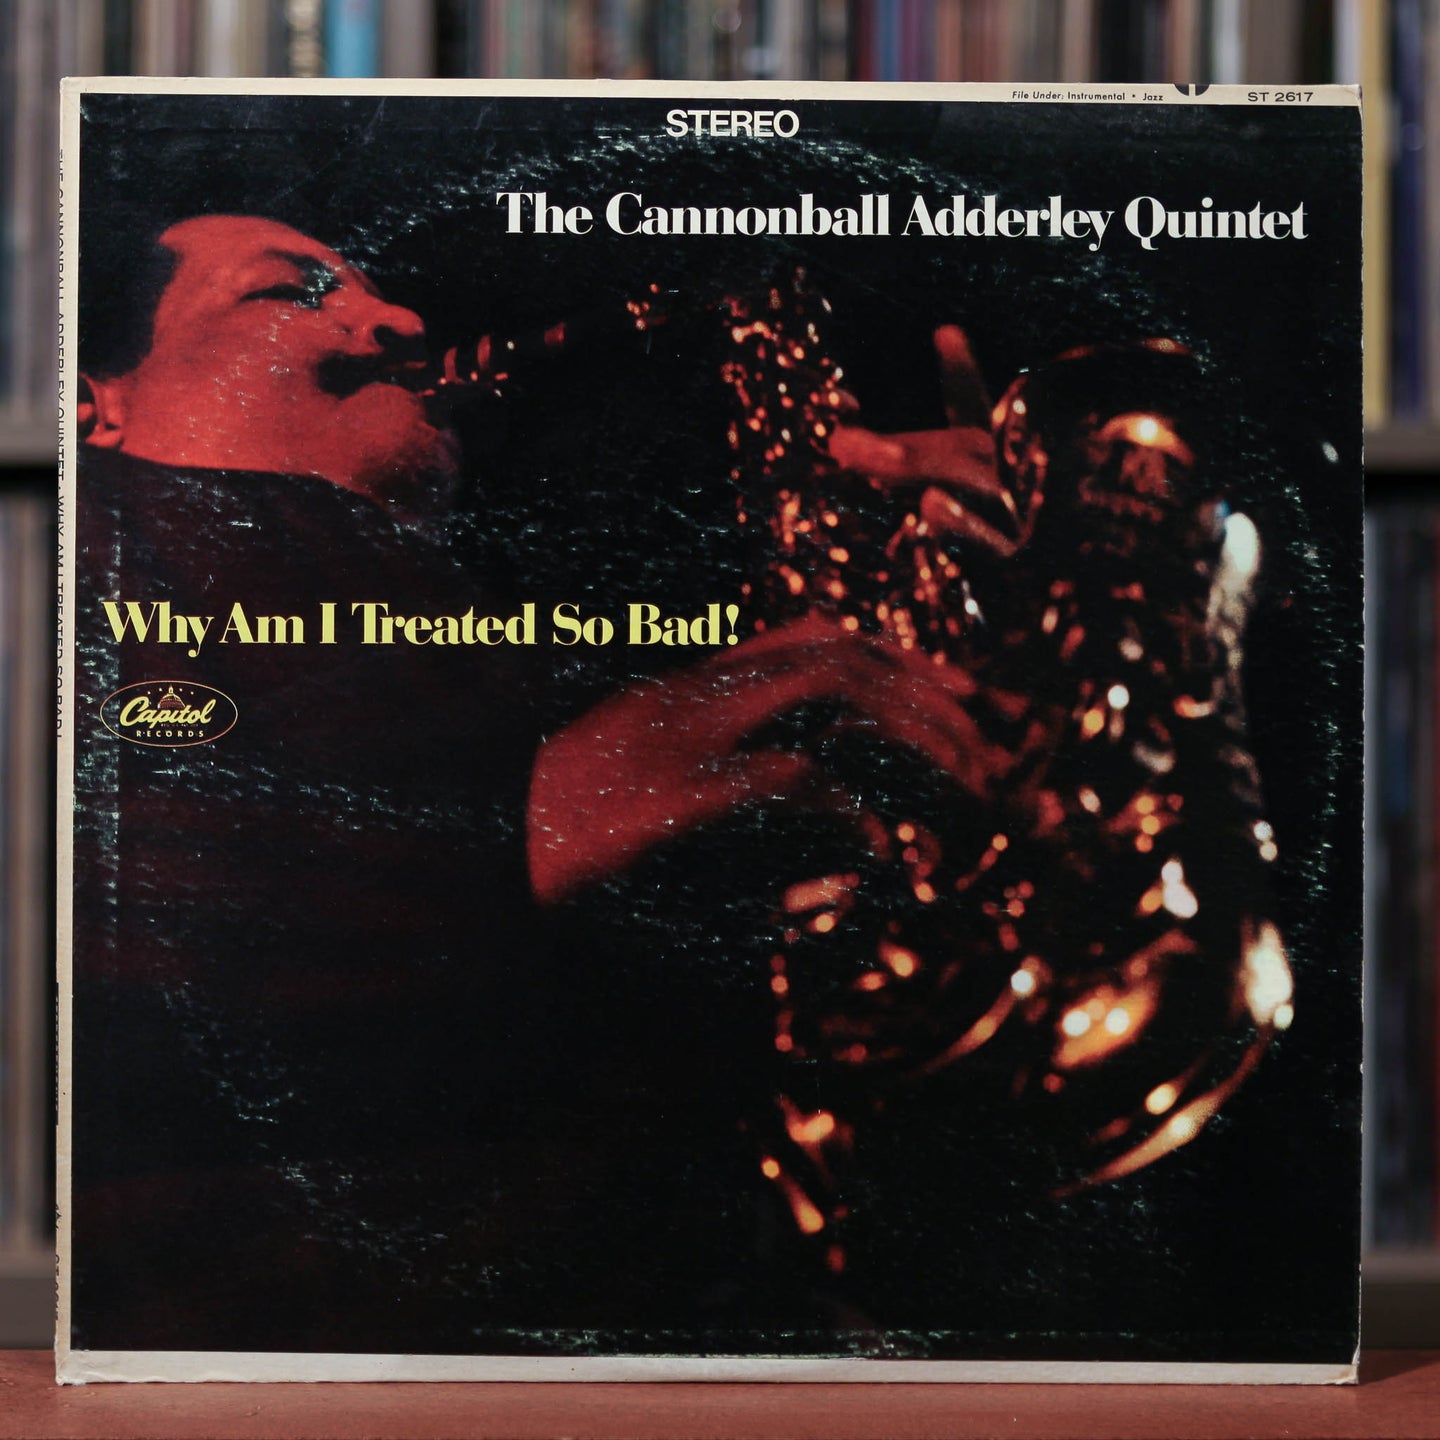 The Cannonball Adderley Quintet - Why Am I Treated So Bad! - 1966 Capitol, VG+/VG